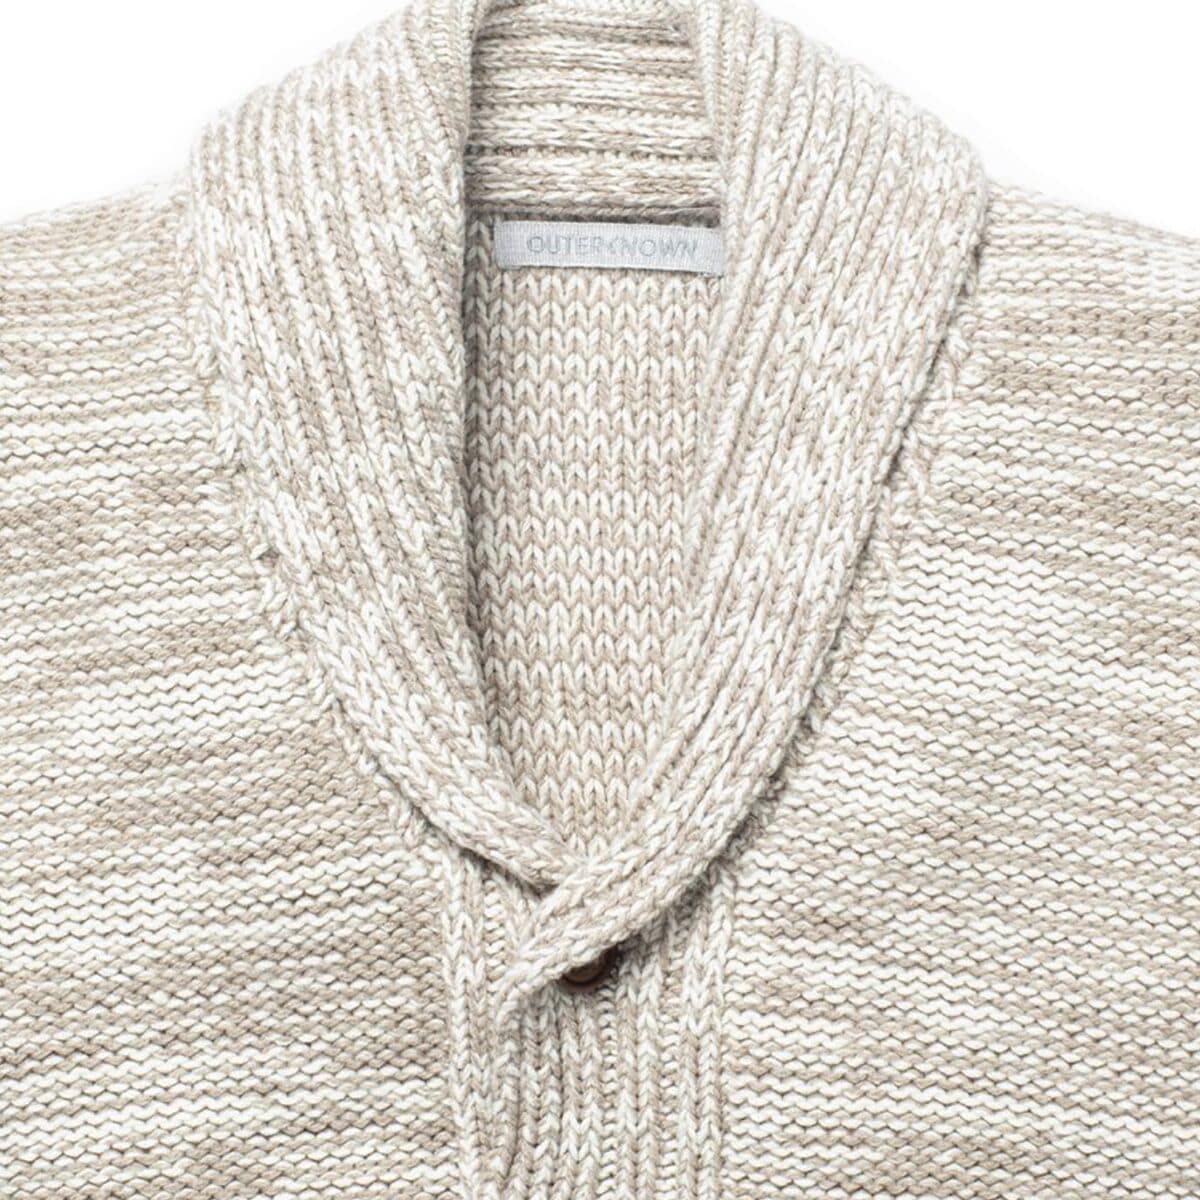 Outerknown Northbeach Cardigan - Men's - Clothing